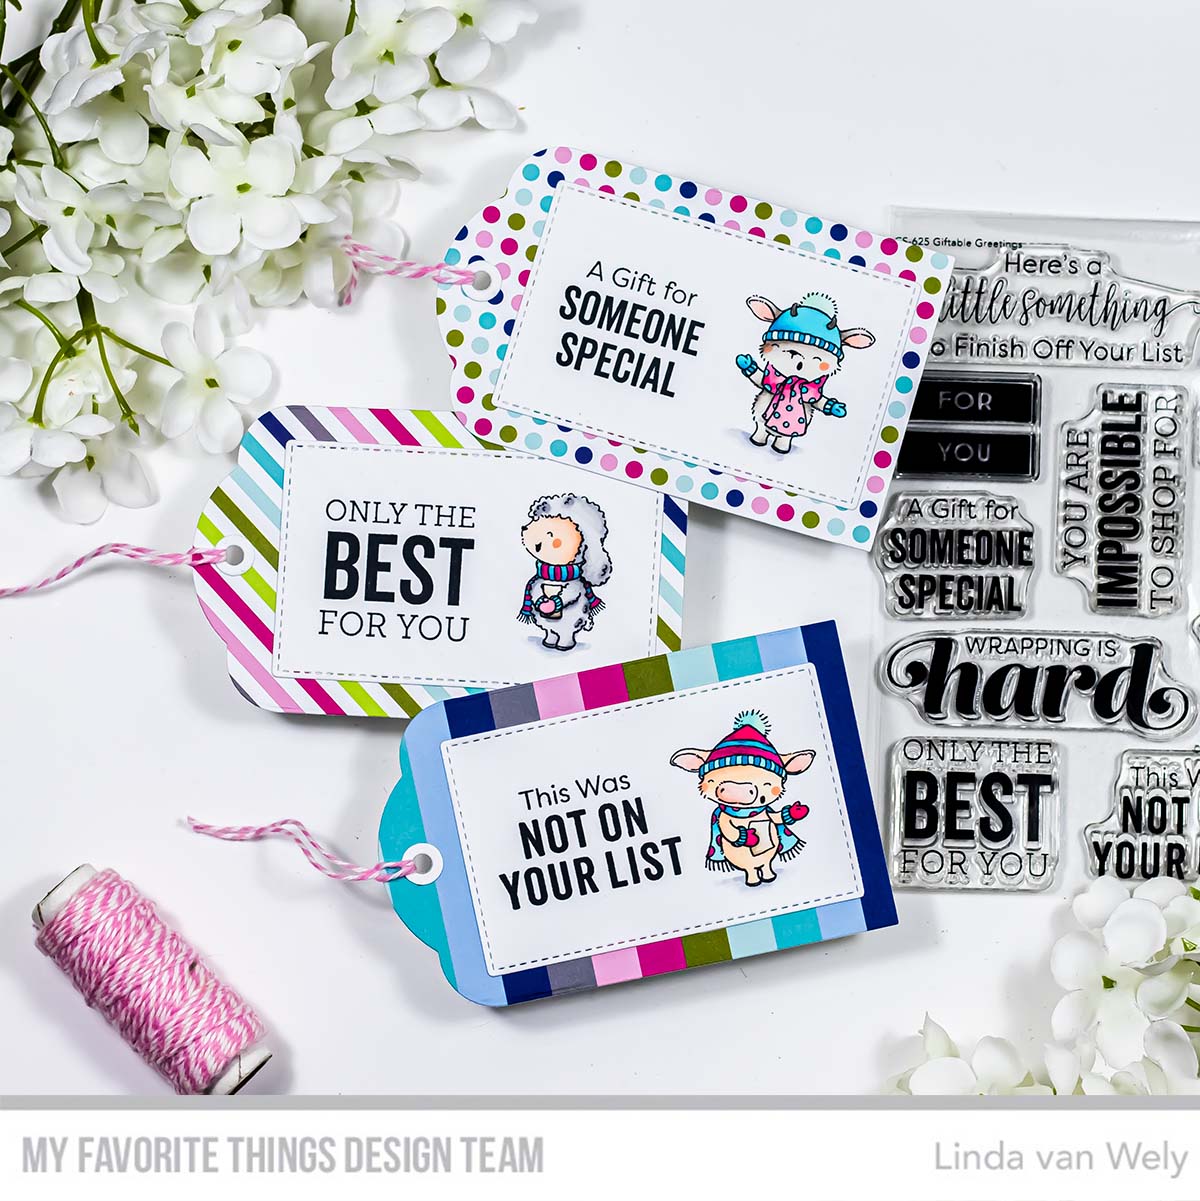 Handmade tags from Linda van Wely featuring products from My Favorite Things #mftstamps